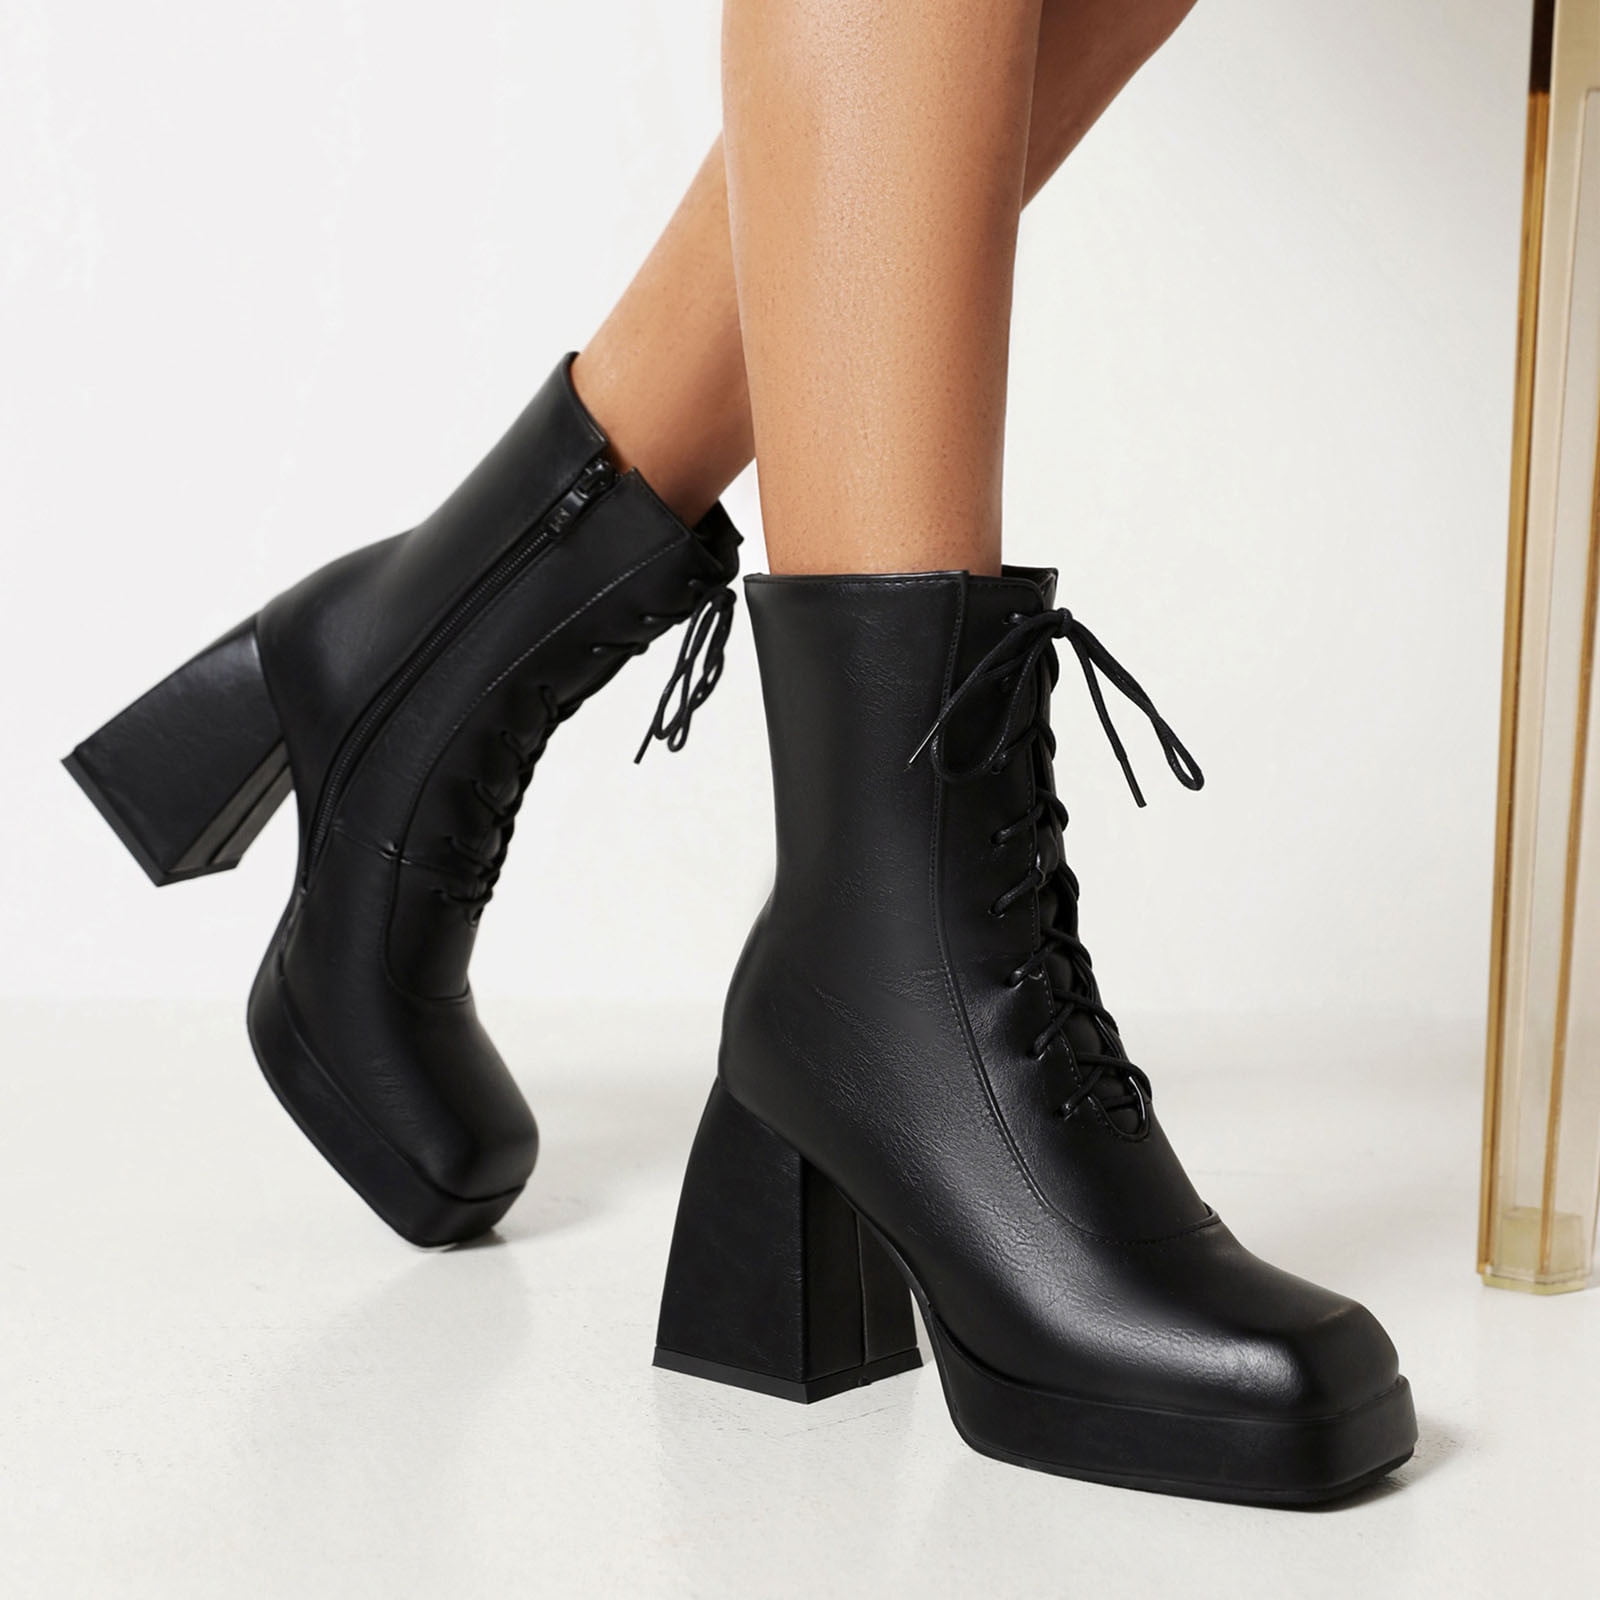 Genuine Leather Women's Mid Heels Ankle Boots